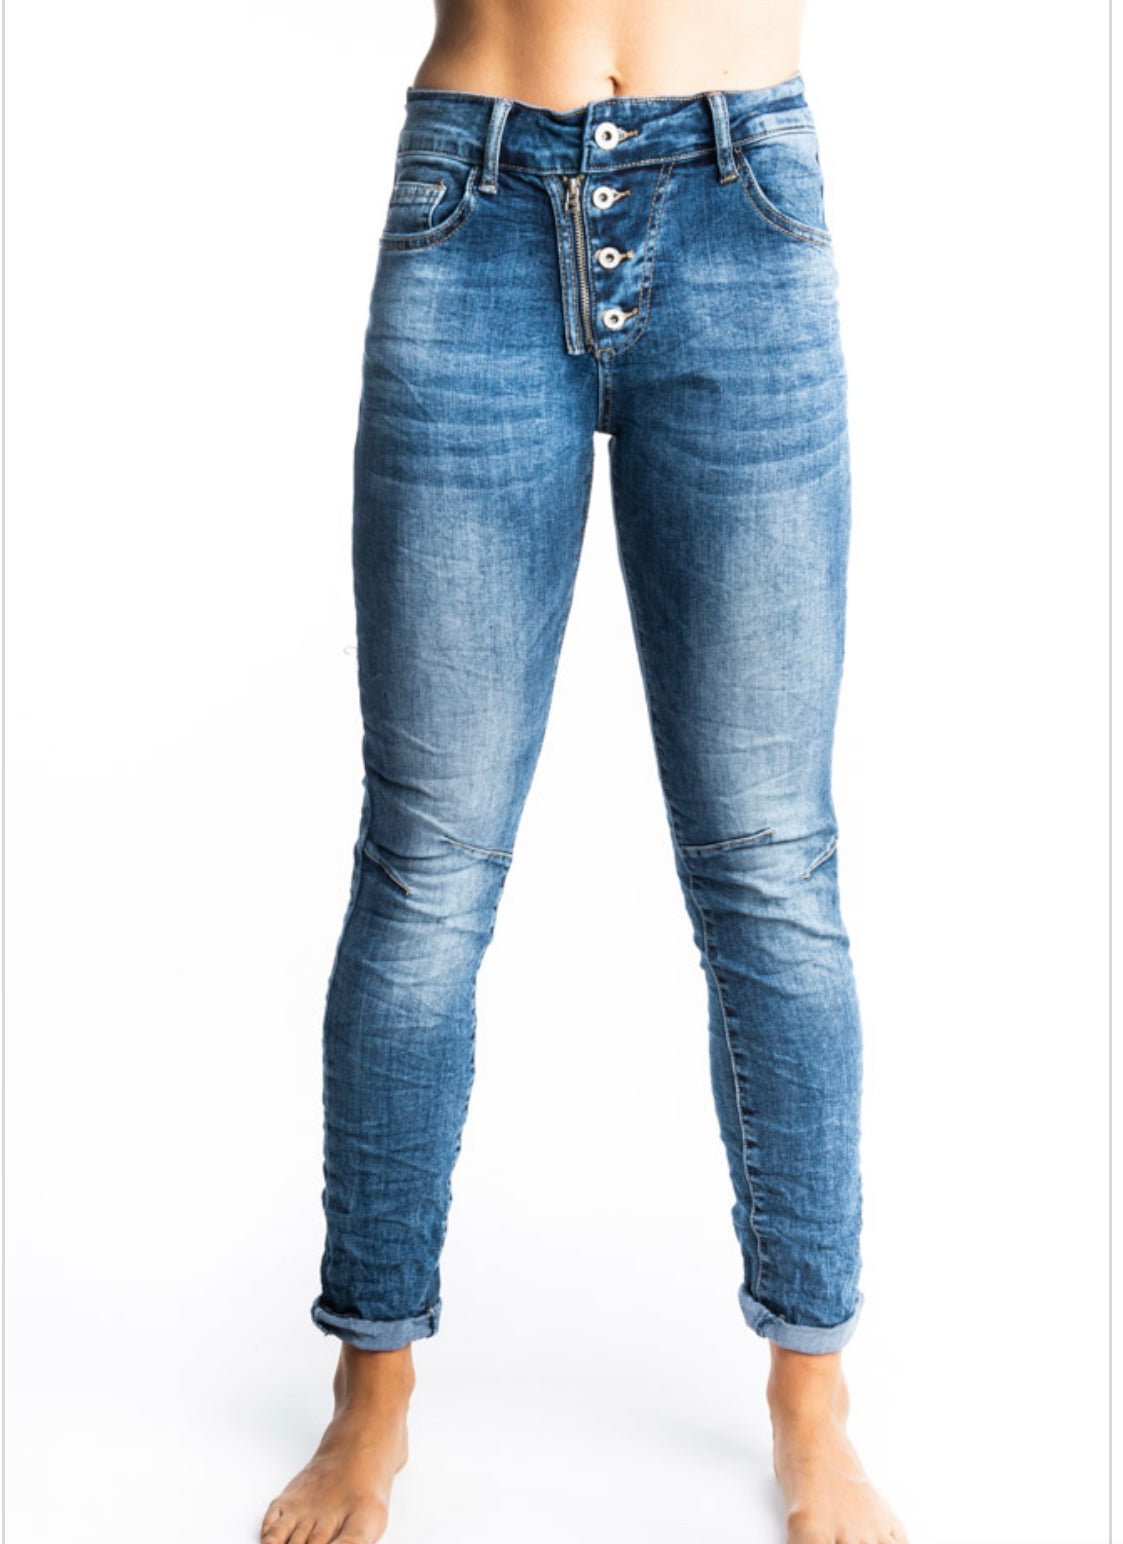 one of the best seller jeans Melly & co brand